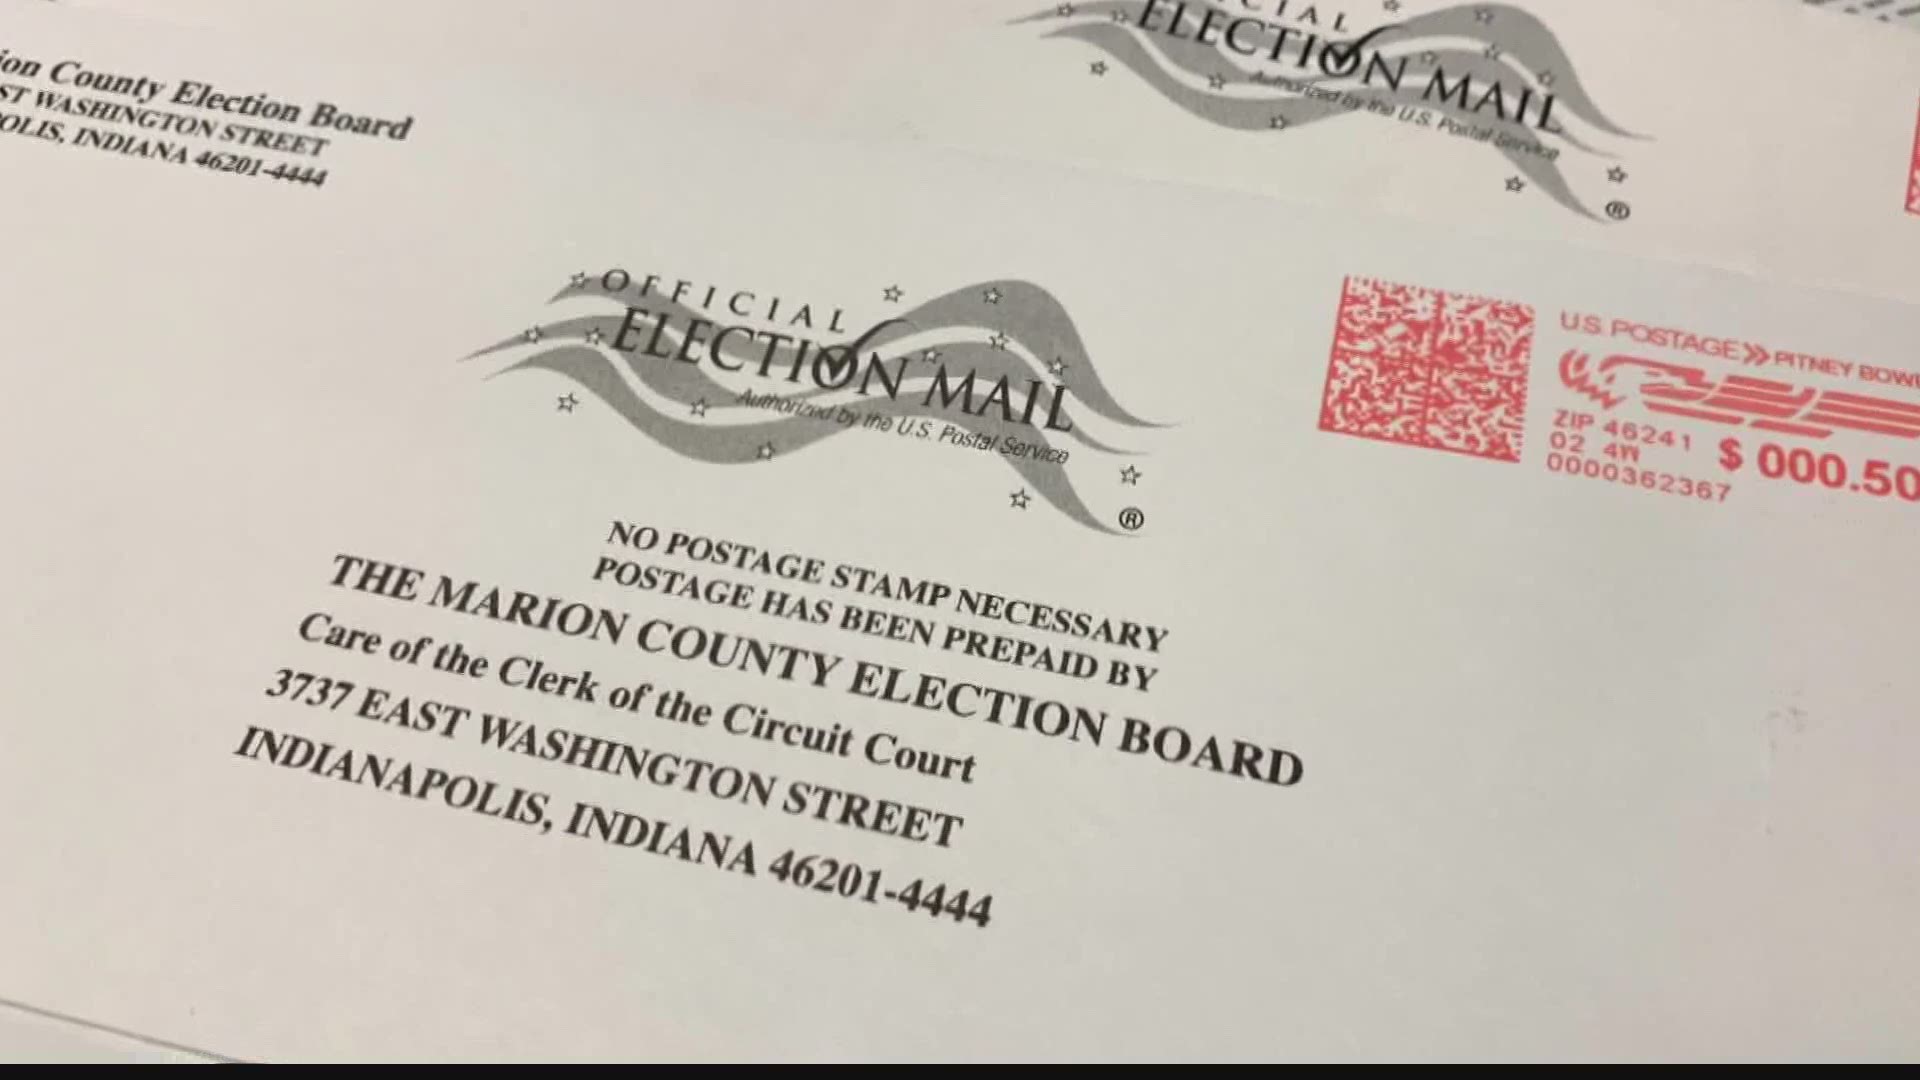 Indiana voters say they are getting absentee ballots applications that they didn't ask for.